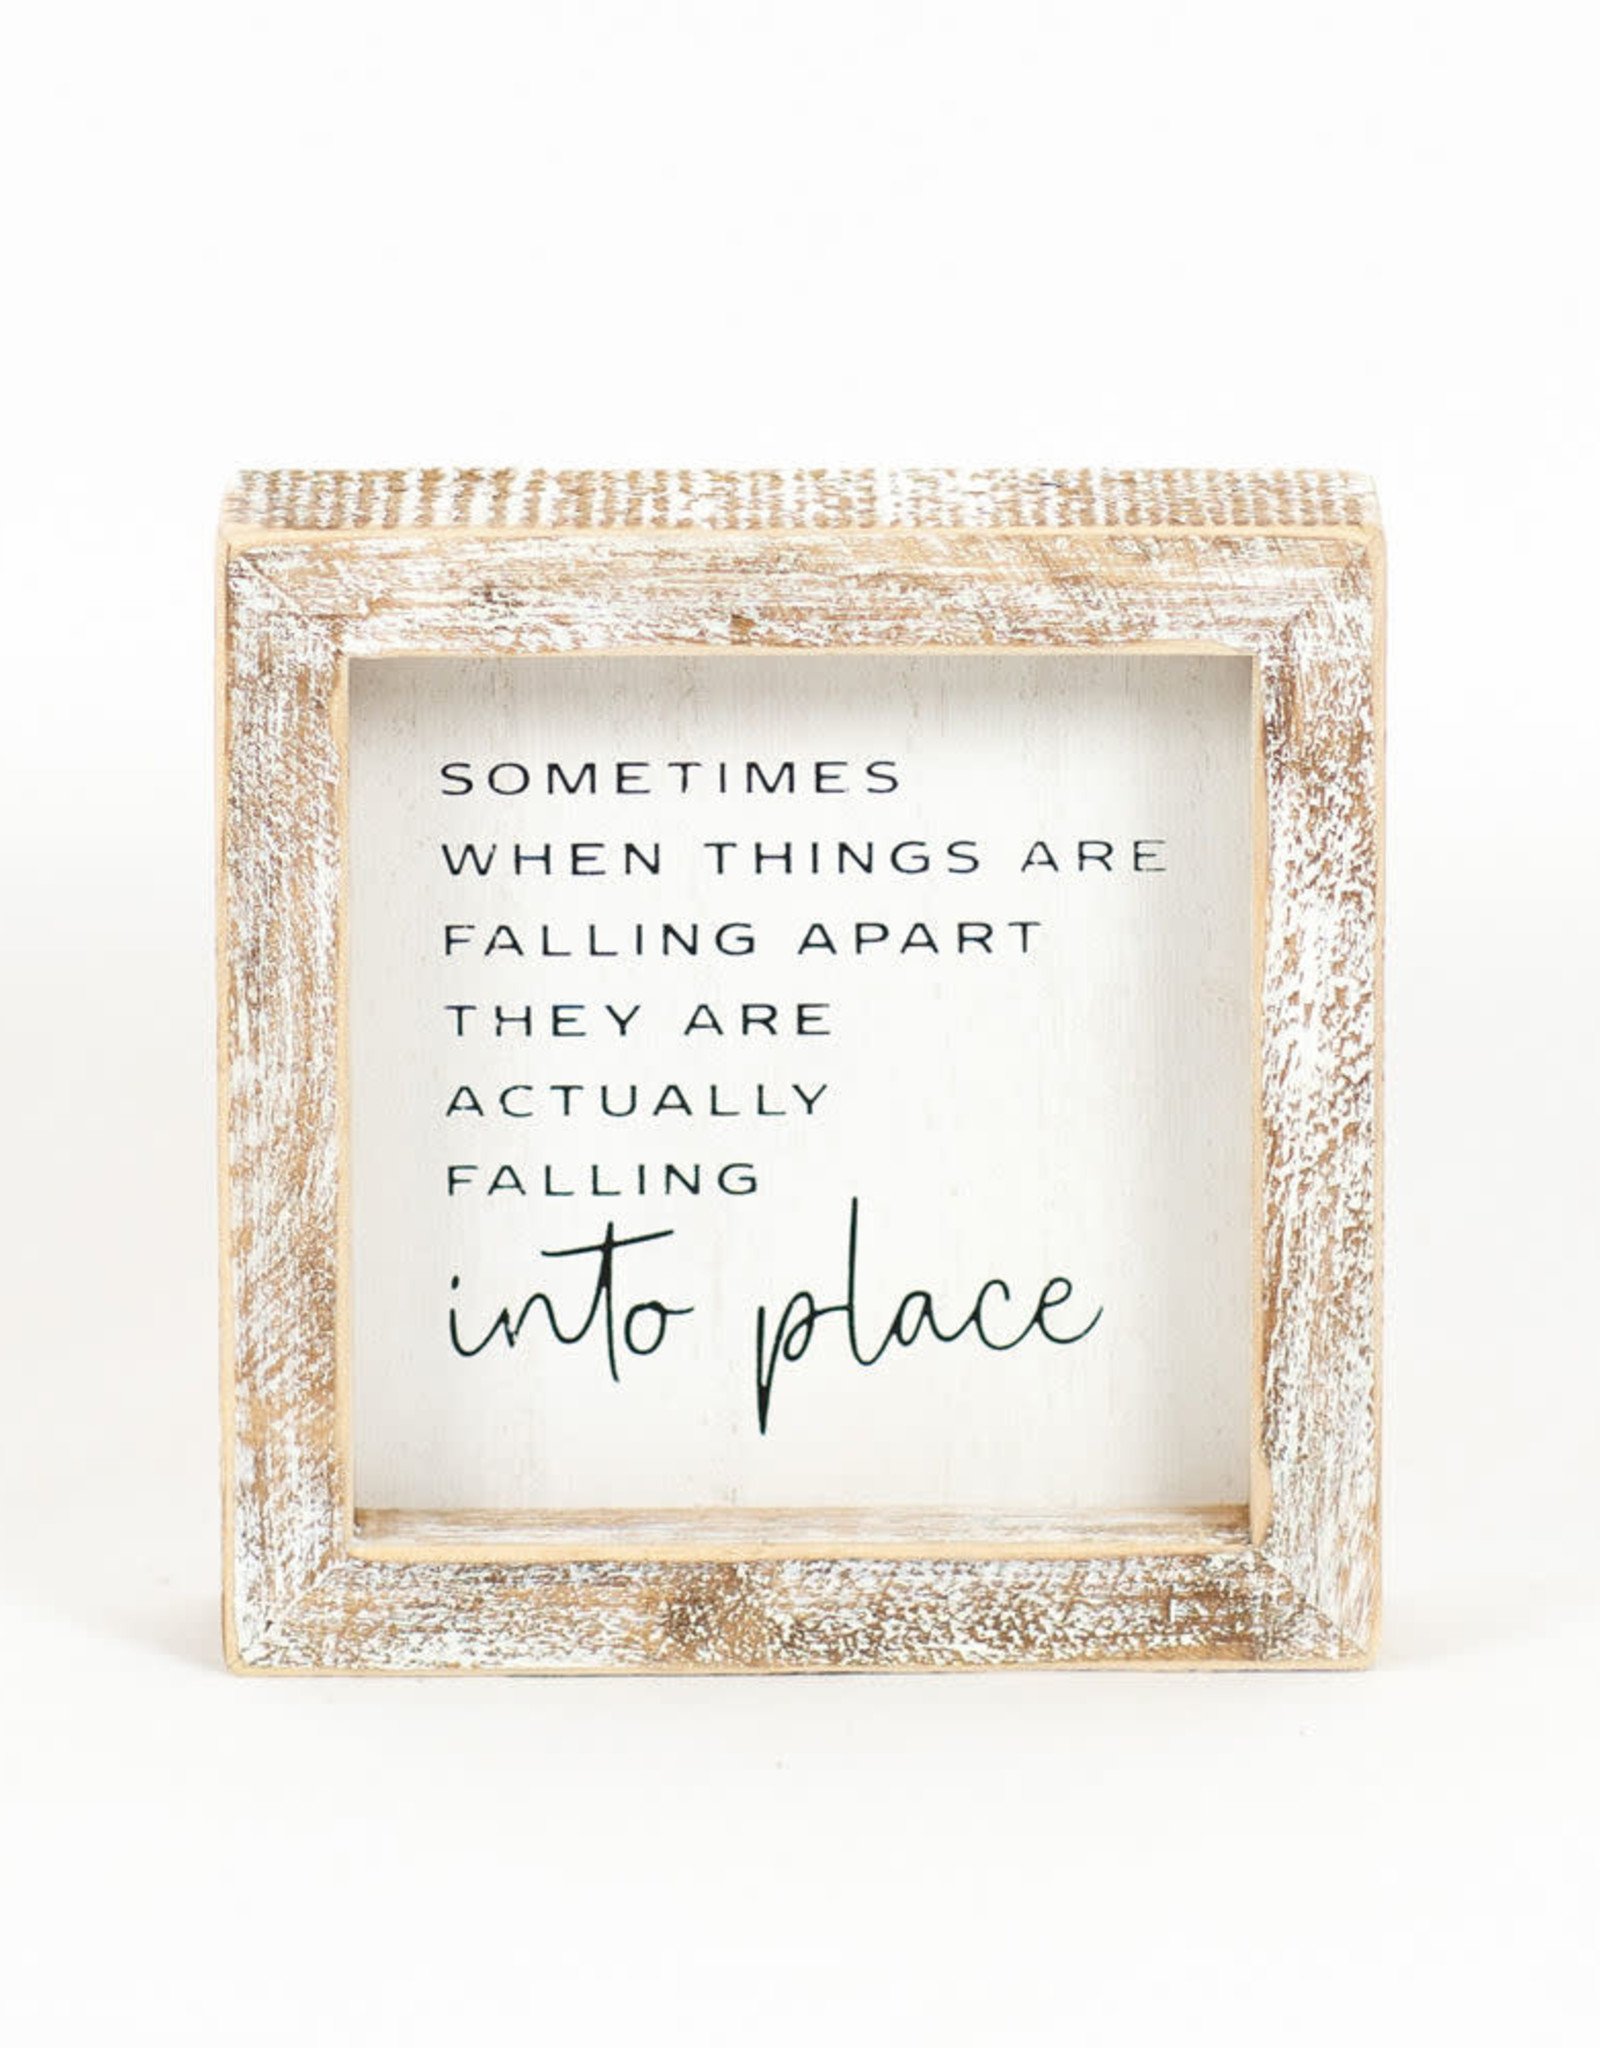 Valentine's Day 2022 11468 5X51.5 WOOD FRAMED SIGN ( WHEN THINGS)